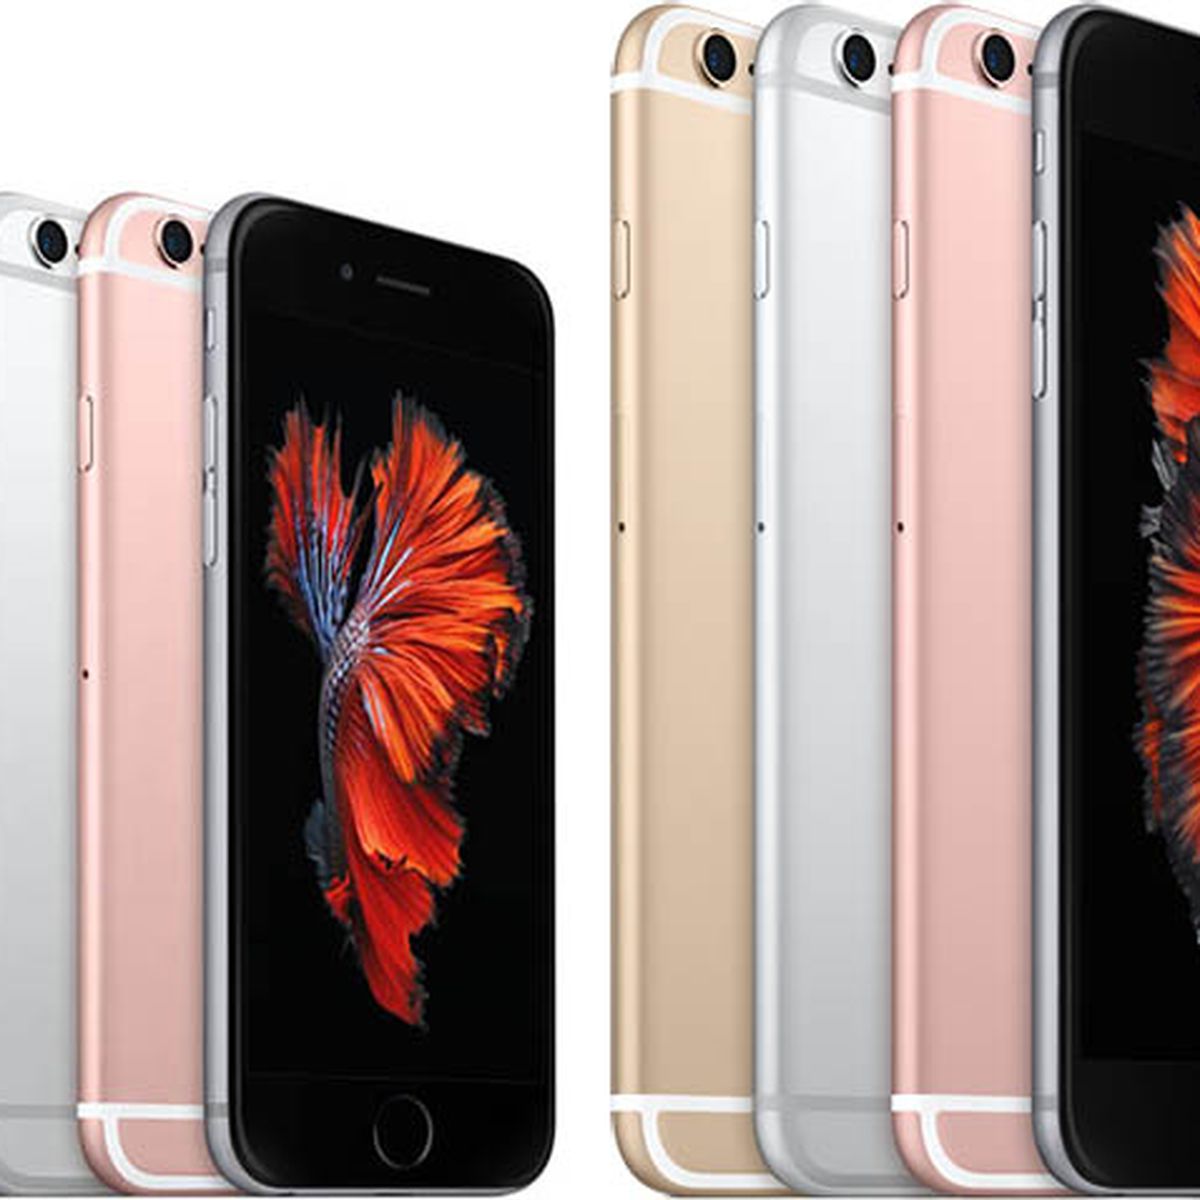 iPhone 6s: Reviews, How to Buy, and Details